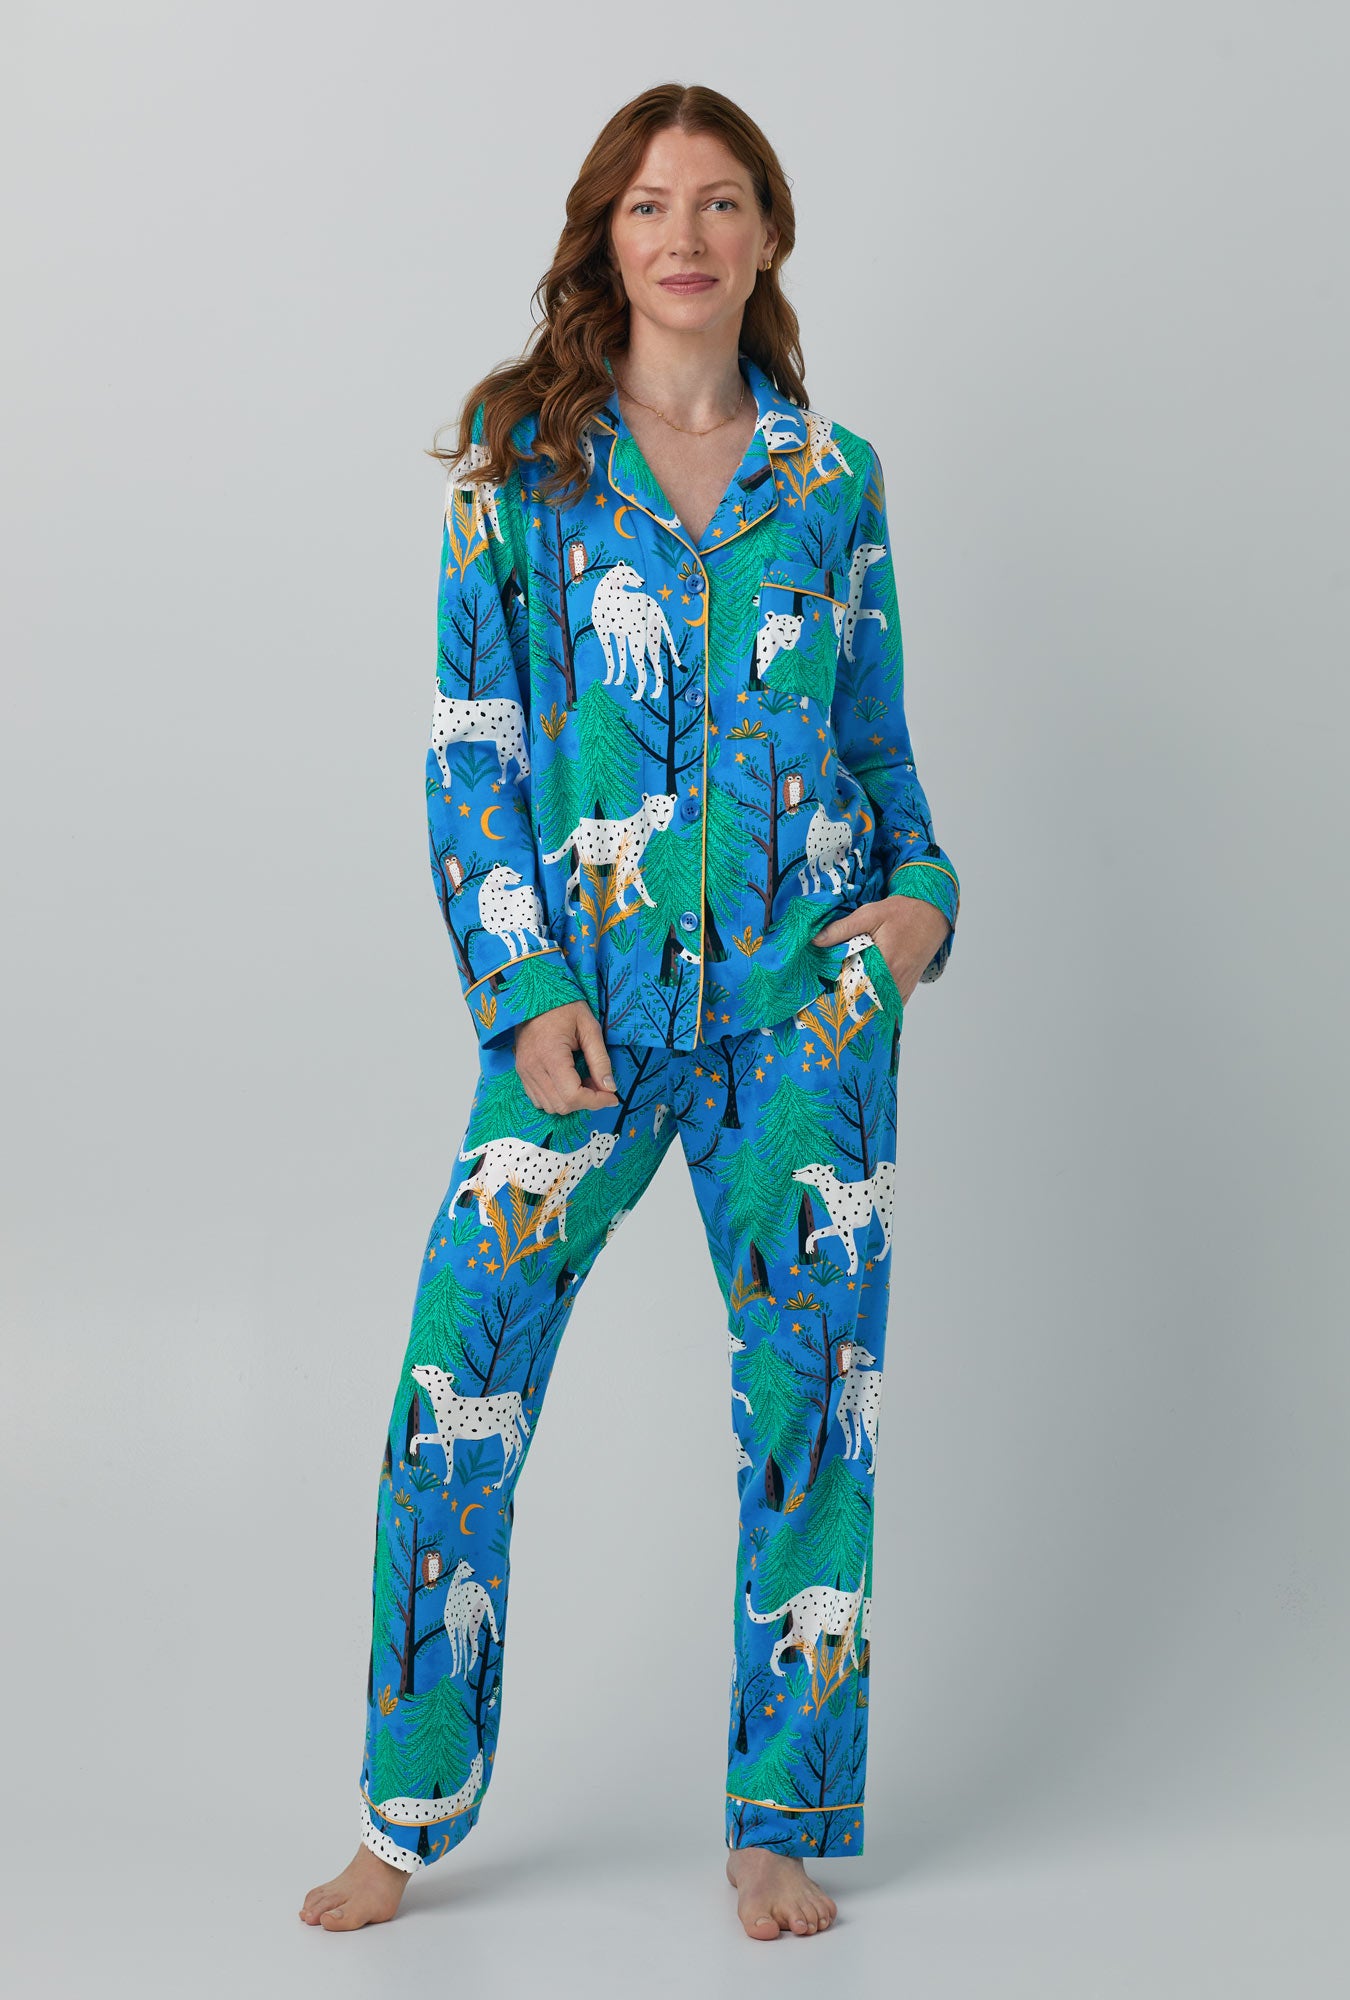 A lady wearing blue Long Sleeve Classic Stretch Jersey PJ Set with Enchanted Forest print